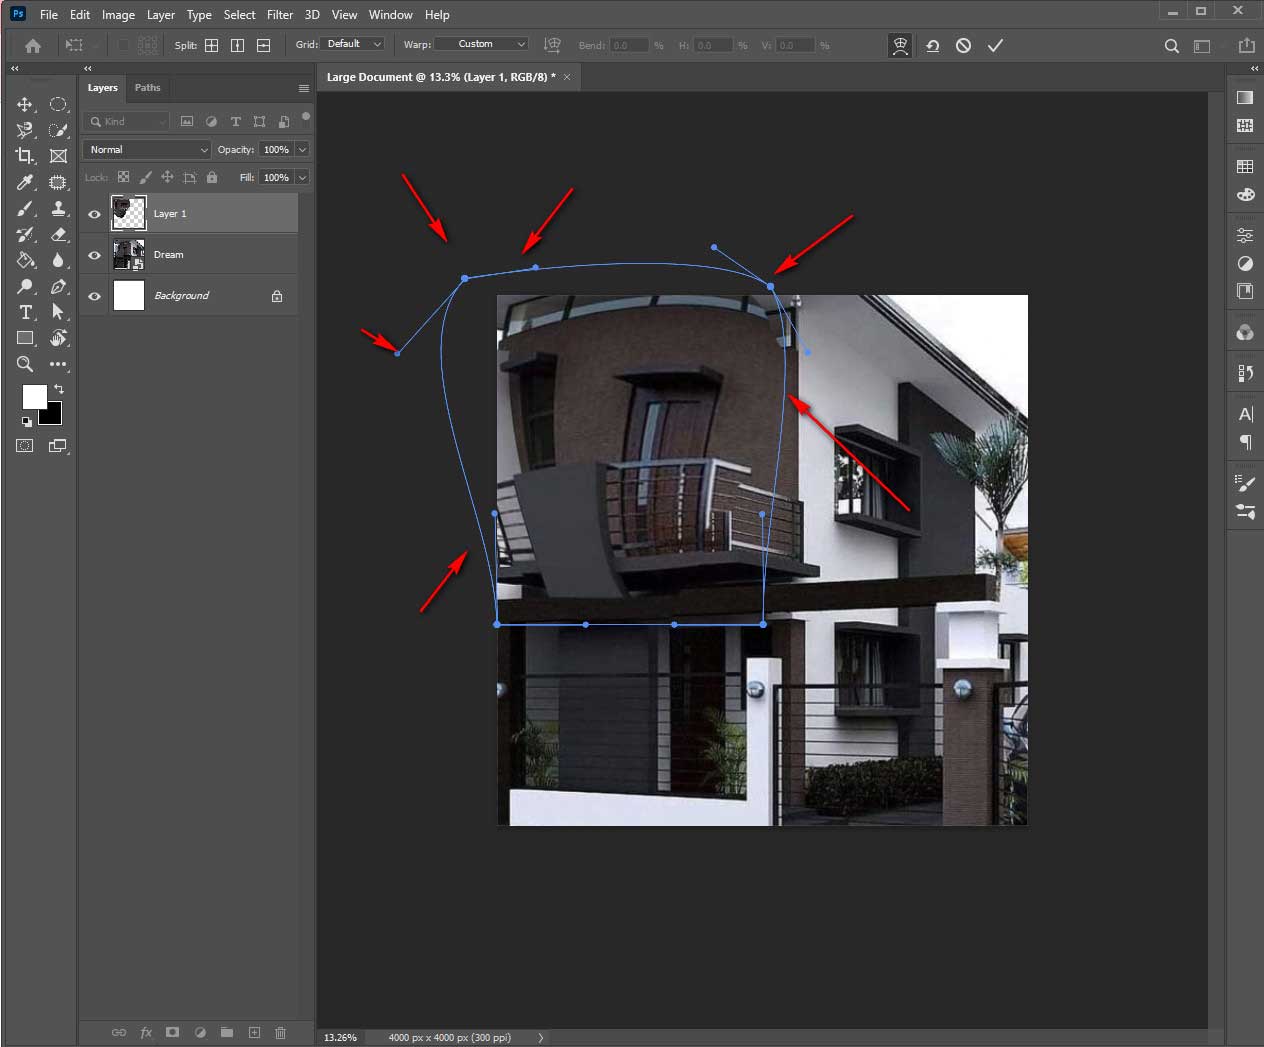 Step-6 How To Bend Image In Photoshop